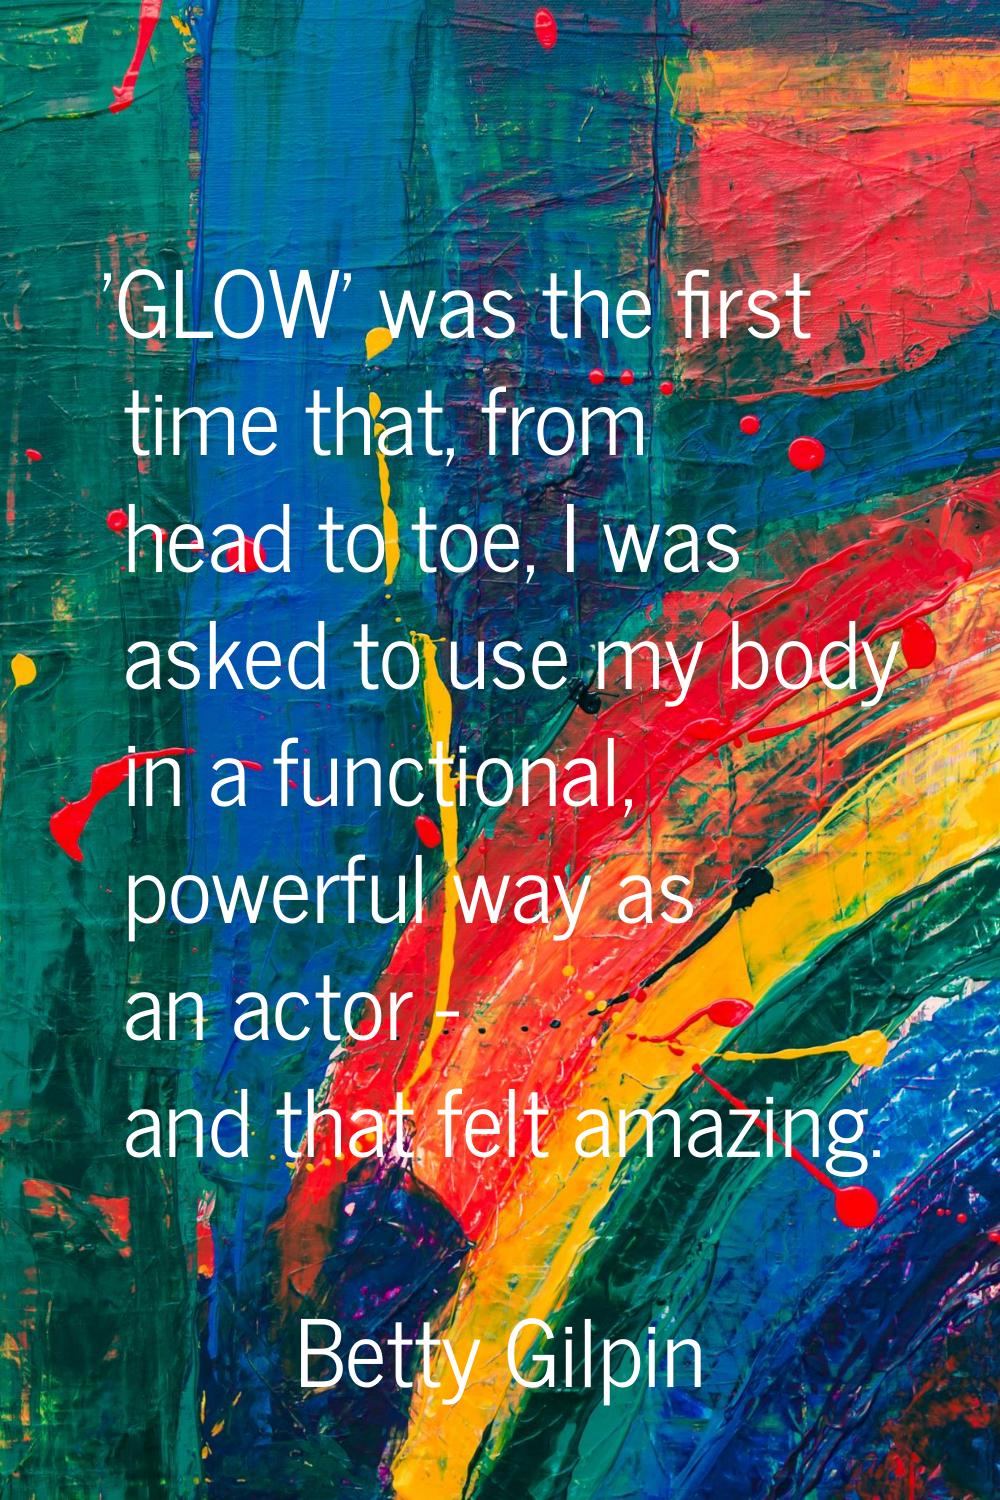 'GLOW' was the first time that, from head to toe, I was asked to use my body in a functional, power